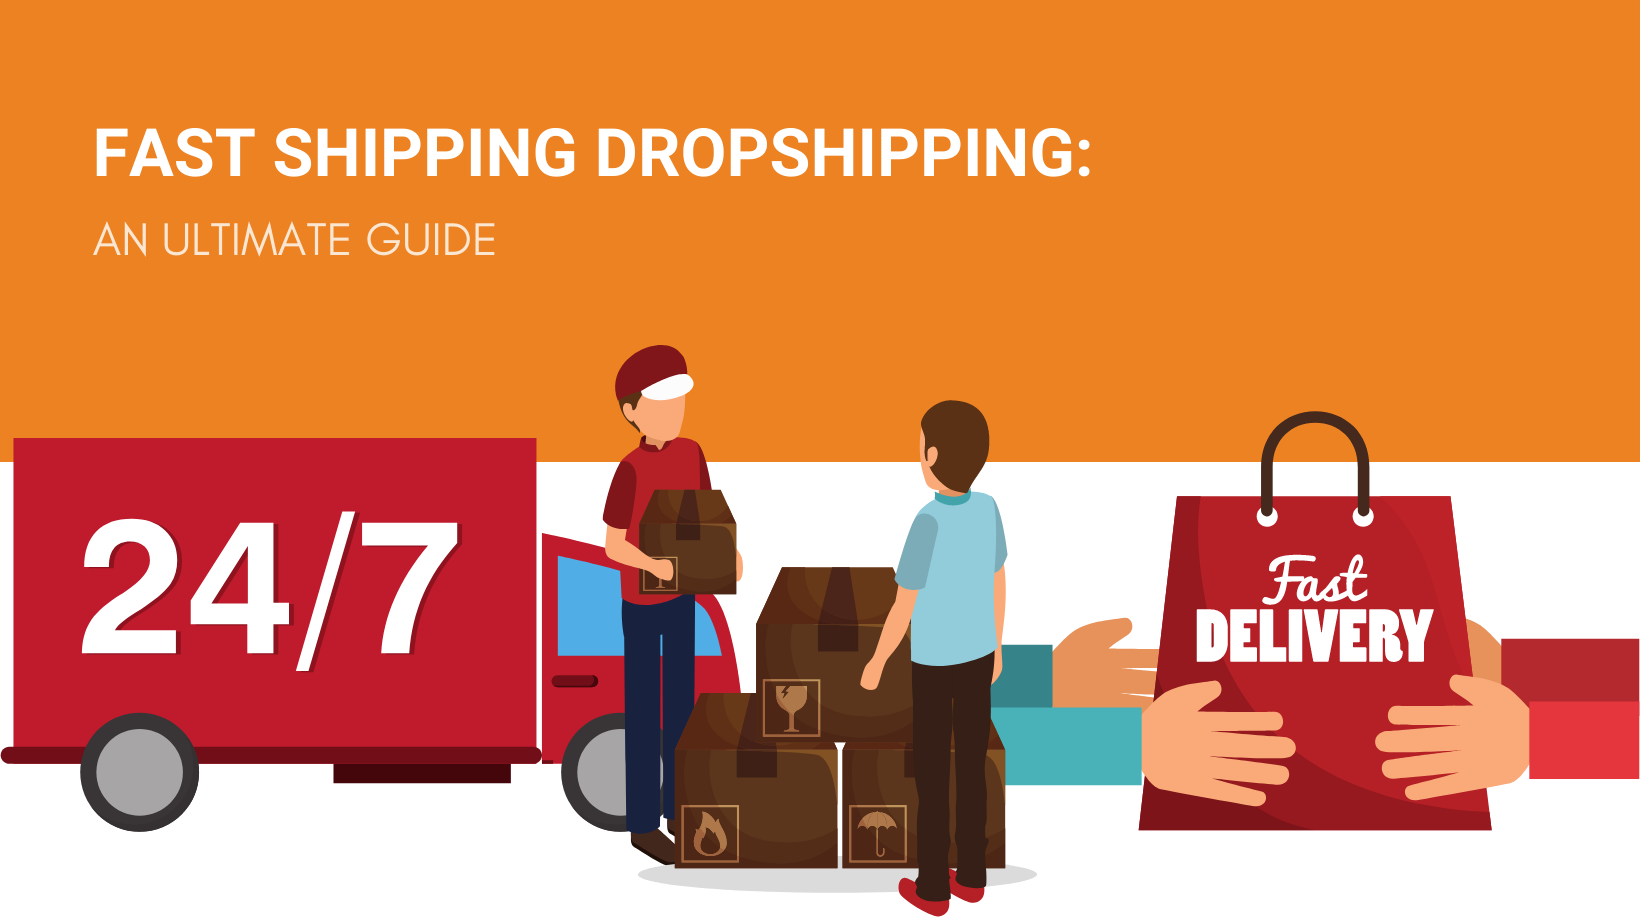 FAST SHIPPING DROPSHIPPING AN ULTIMATE GUIDE